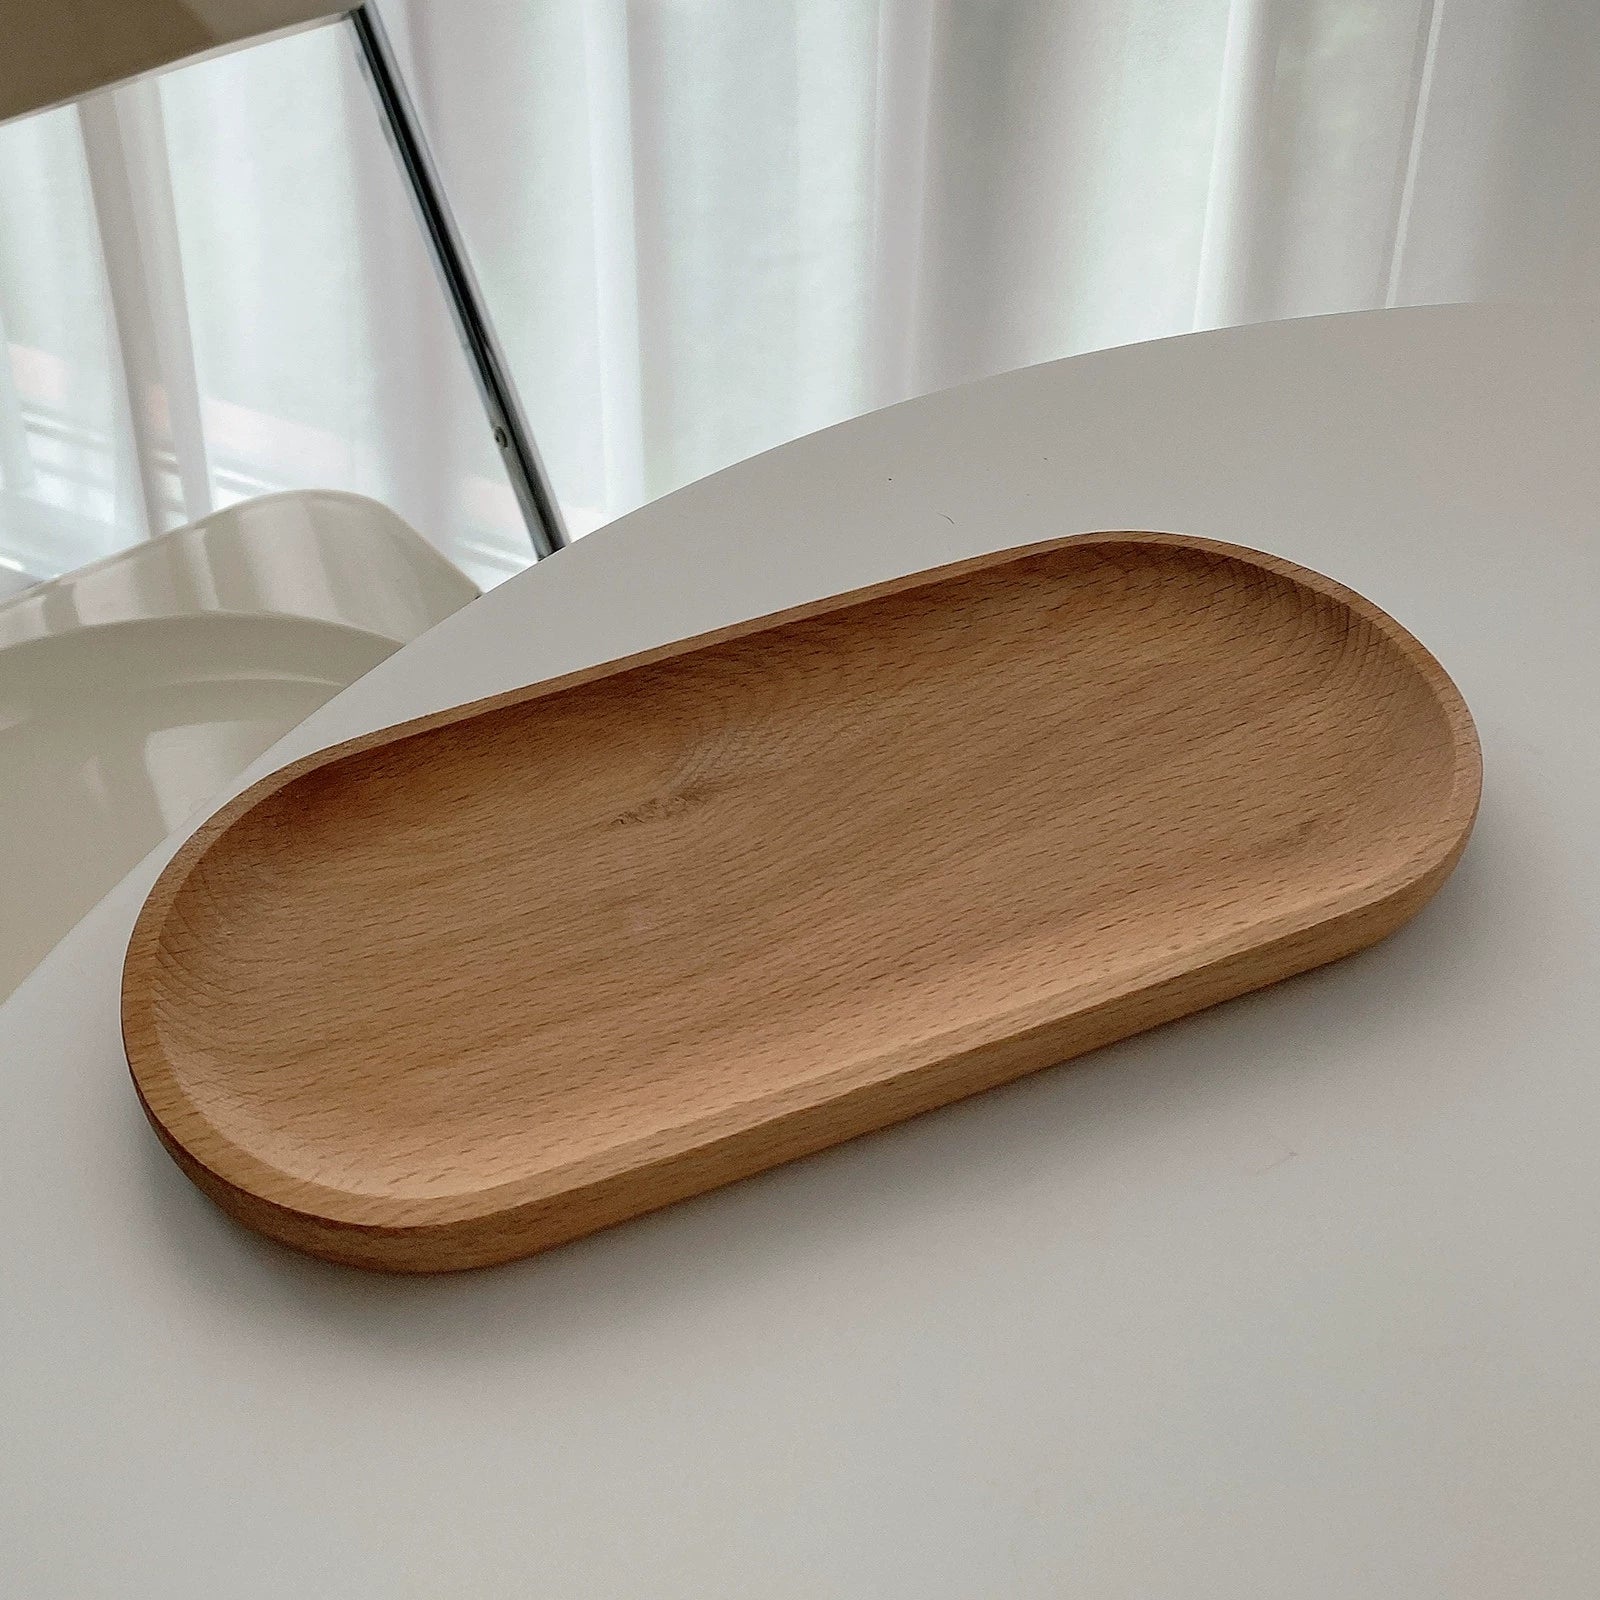 Versatile Wooden Tray - Perfect for Perfume, Soap, Jewelry & Candles